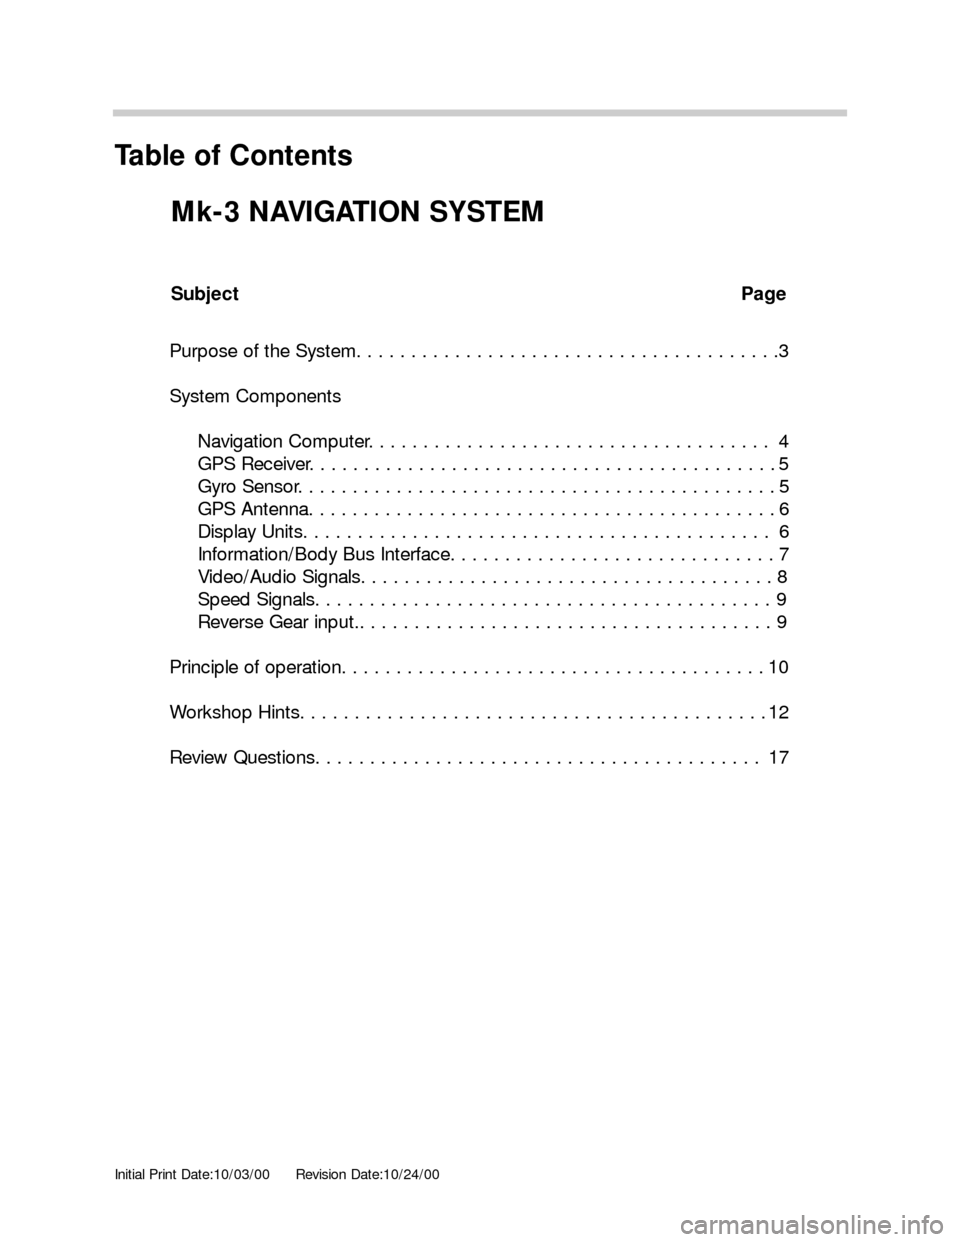 BMW X5 2003 E53 Mk3 Navigation System Manual Initial Print Date:10/03/00Revision Date:10/24/00
Subject Page
Purpose of the System. . . . . . . . . . . . . . . . . . . . . . . . . . . . . . . . . . . . . . .3
System Components
Navigation Computer